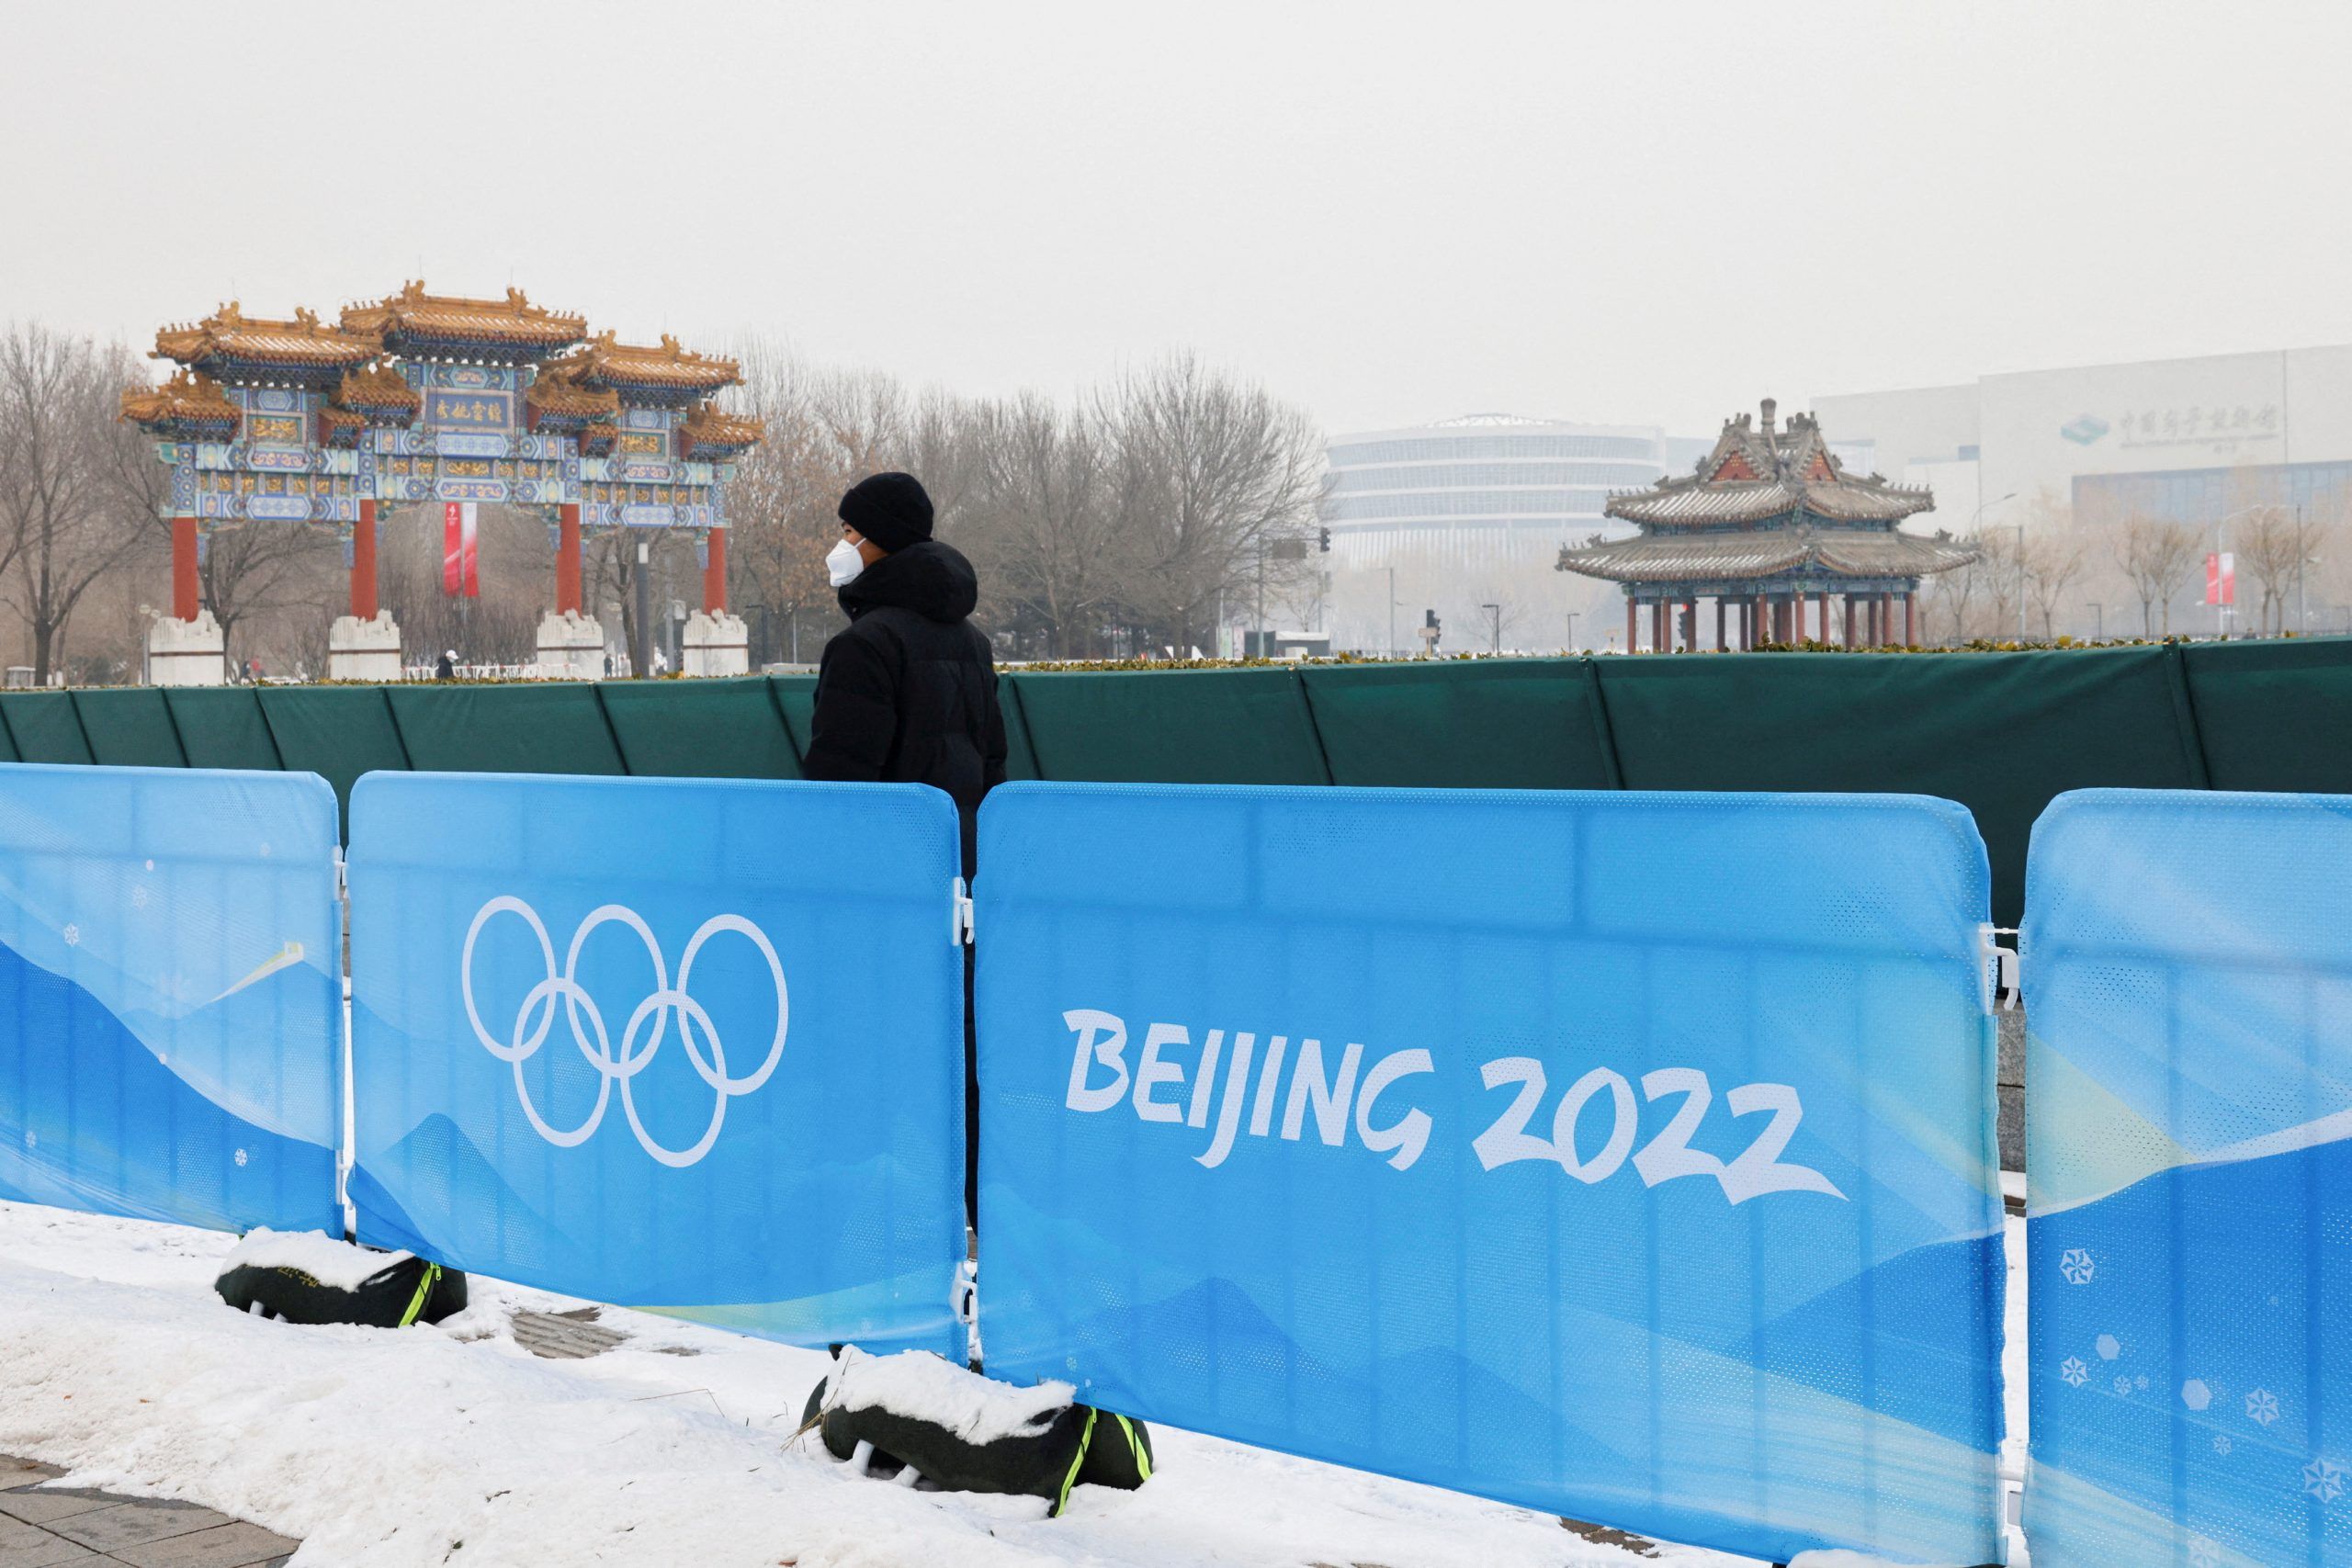 A security guard stands near the closed loop "bubble" at the Main Press Center ahead of the Beijing 2022 Winter Olympics in Beijing, China January 23, 2022. 